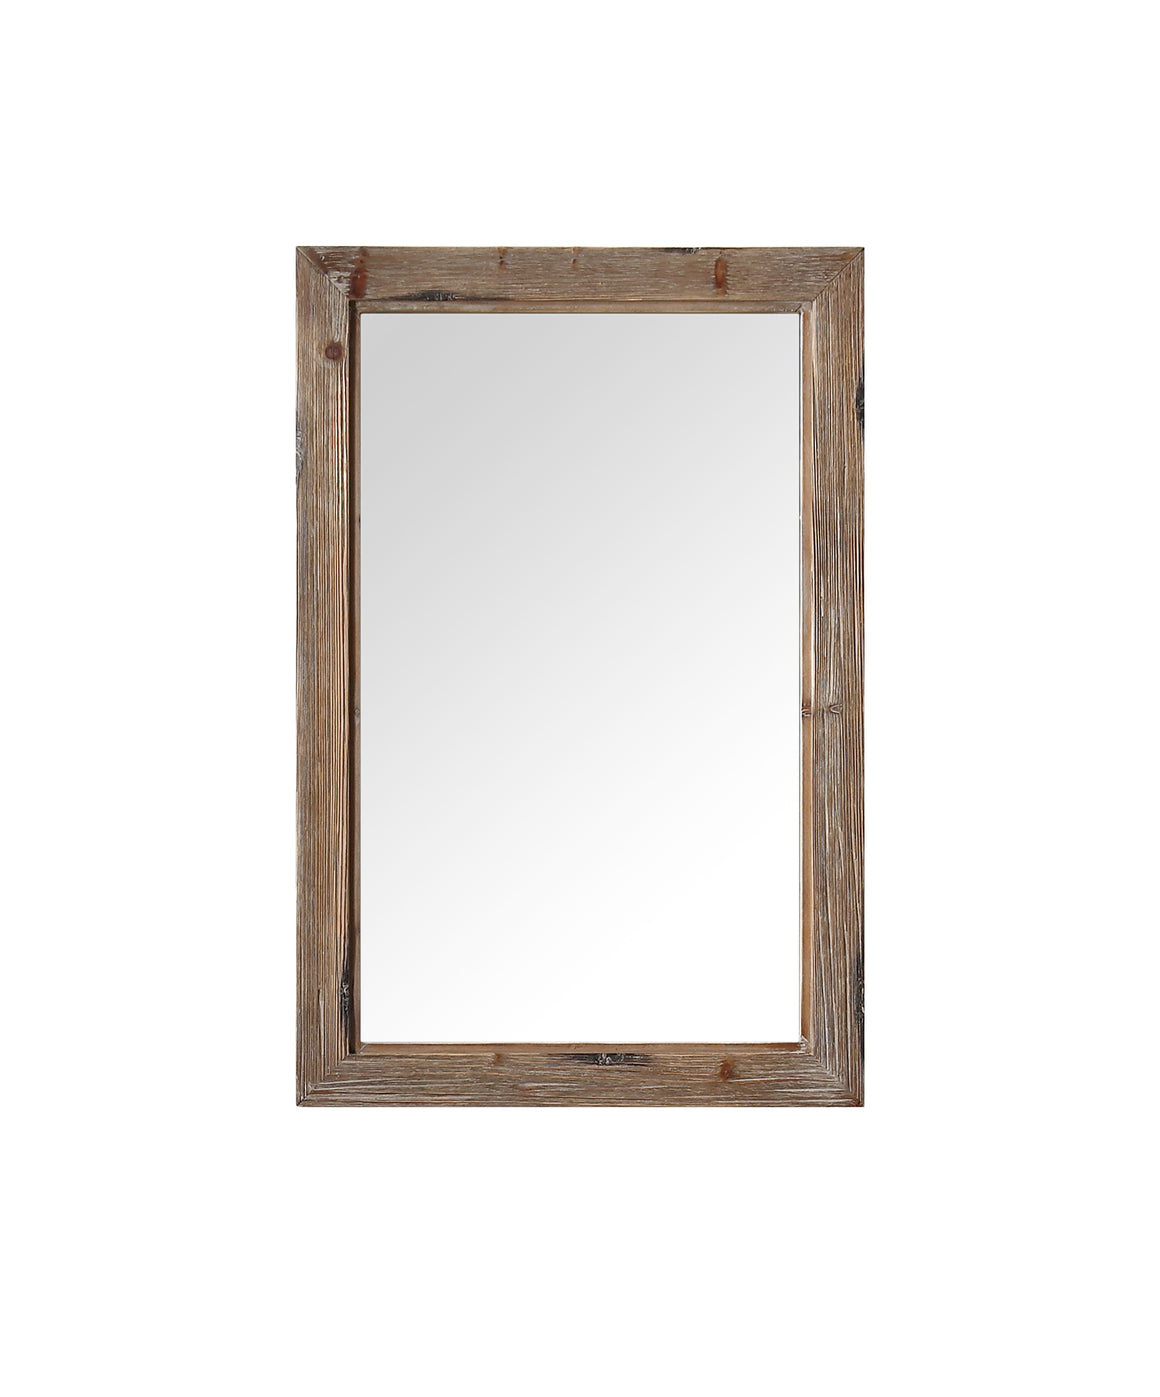 24" Rustic Fir Mirror with Distressed Finish